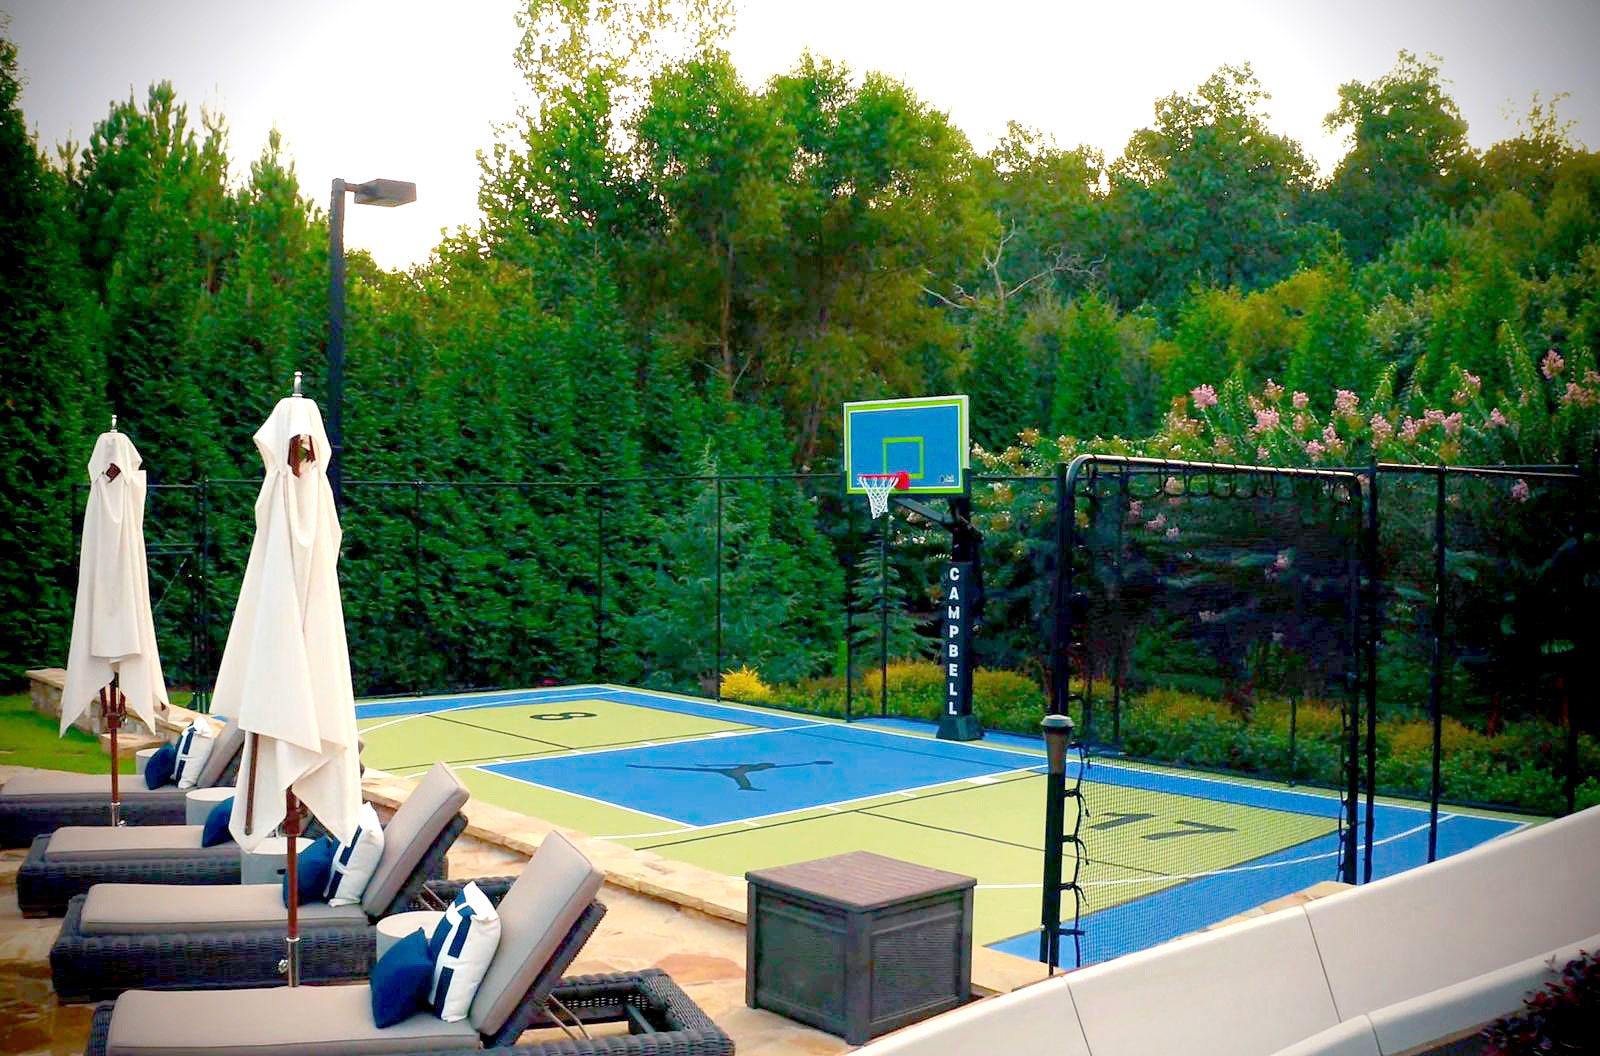 Alternate view of the bright blue and kiwi backyard multi-court